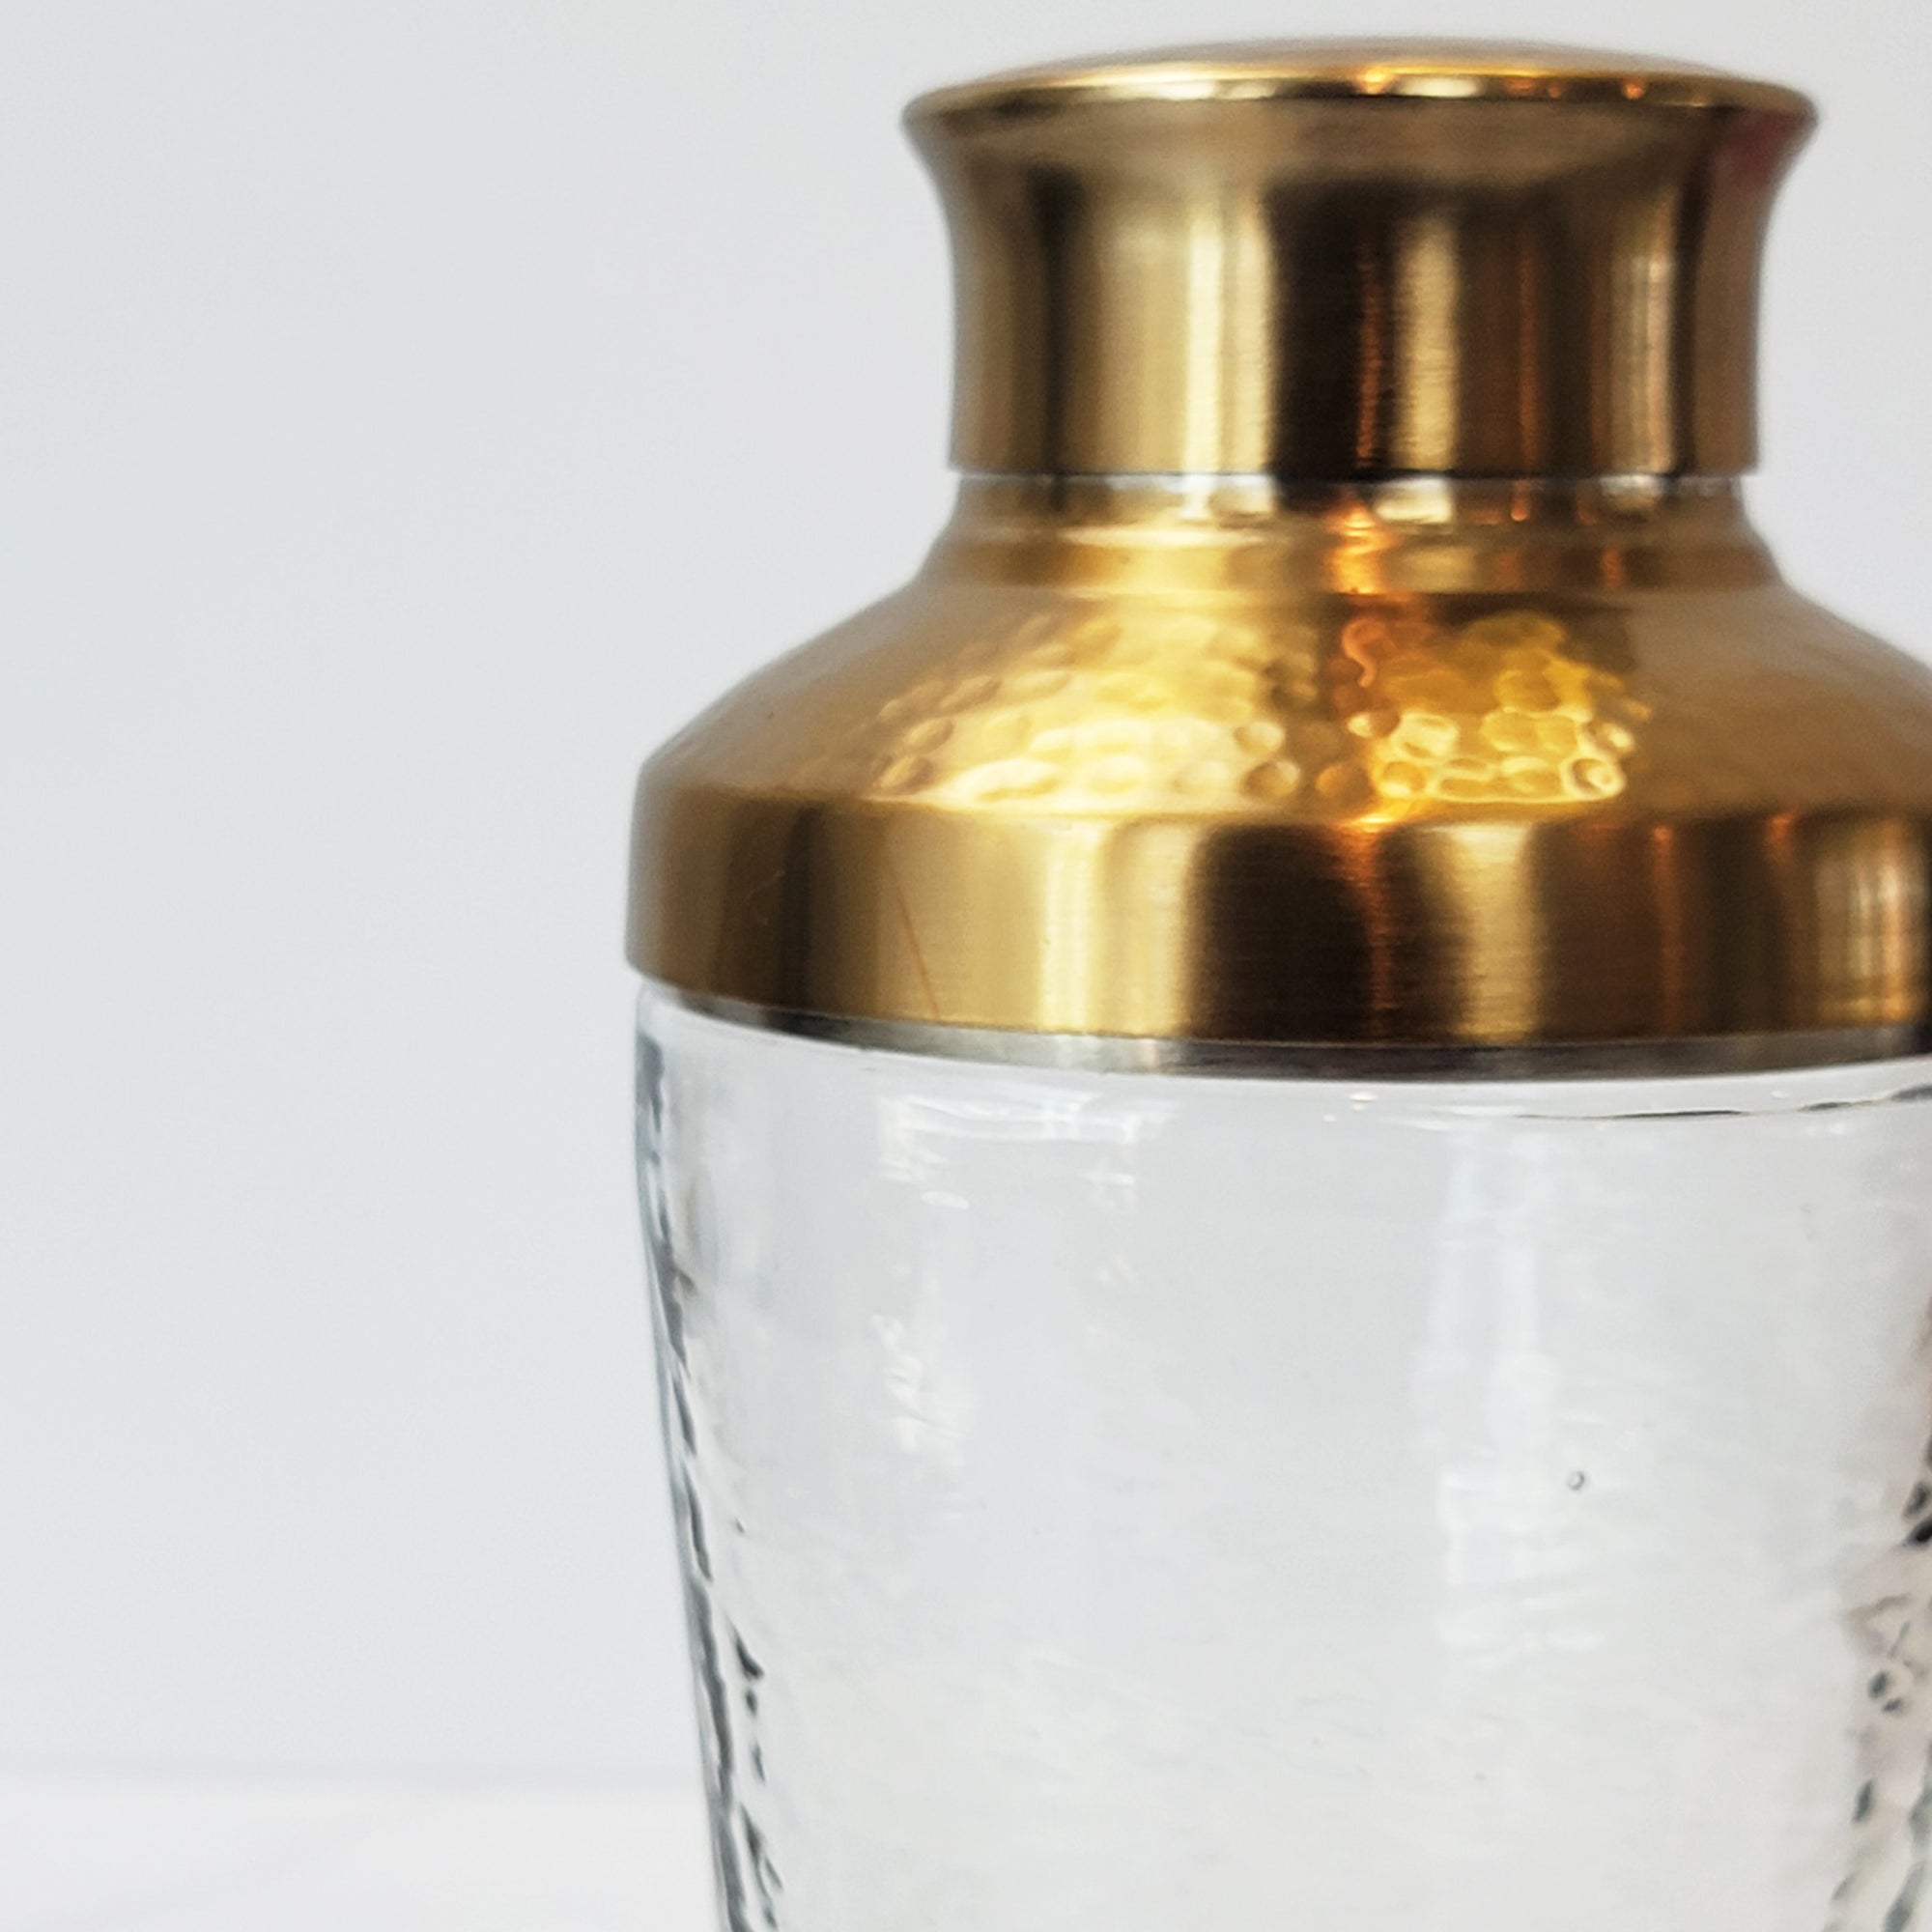 Pebbled glass and brass & steel cocktail shaker